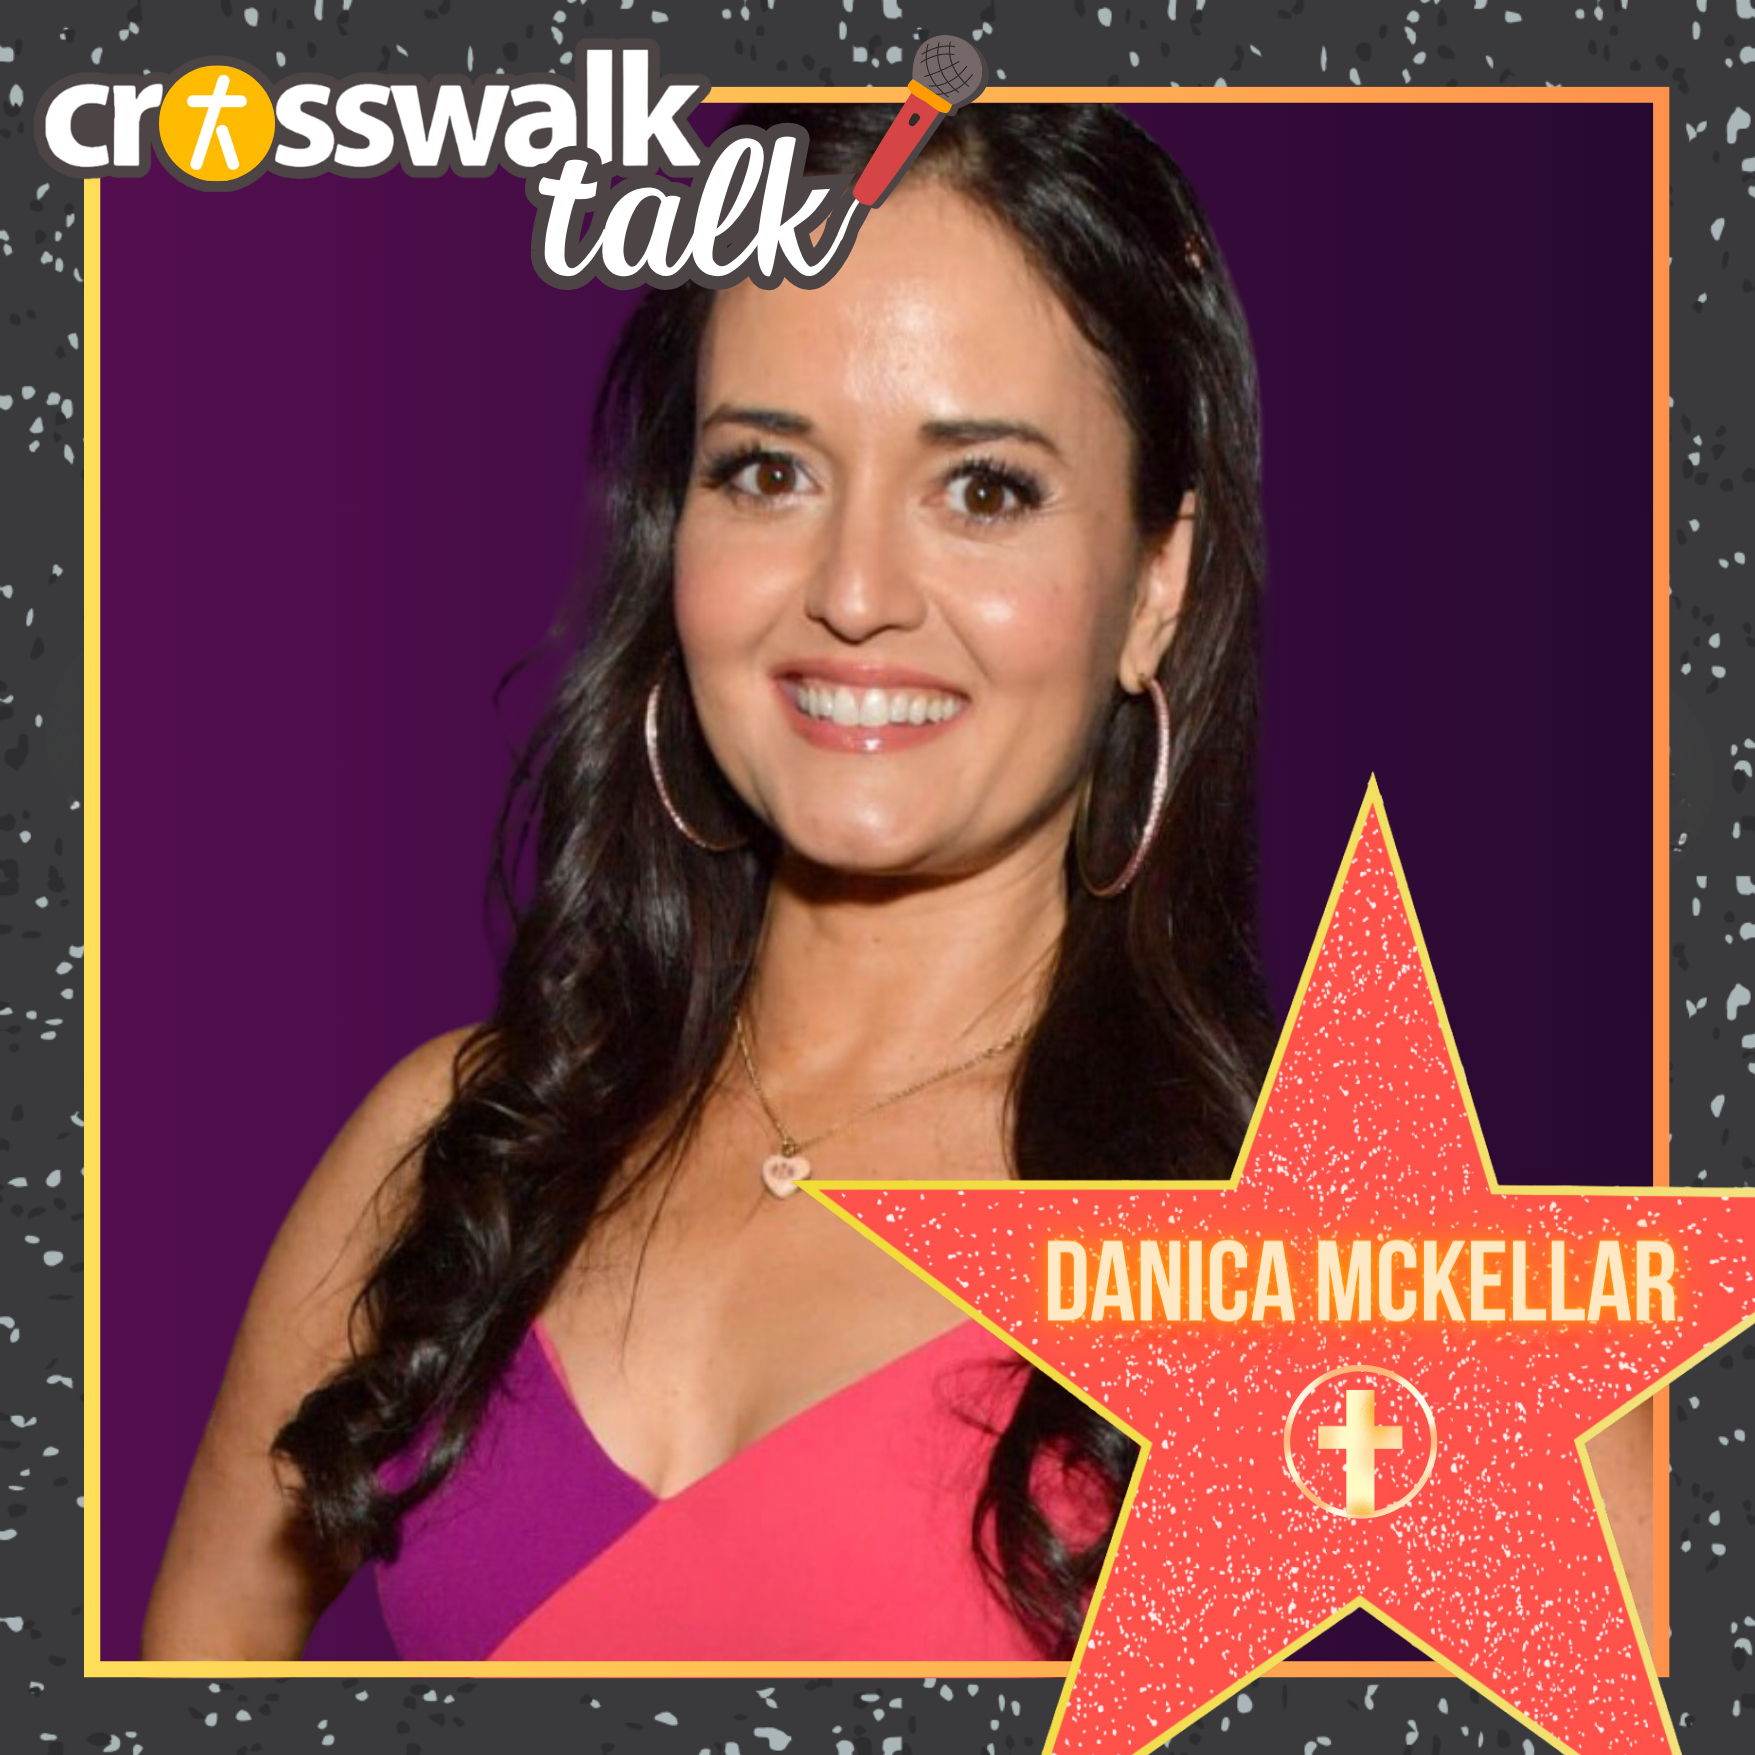 Danica McKellar Talks About Her Passion for Jesus: 'Christianity Is Not What I Thought It Was'